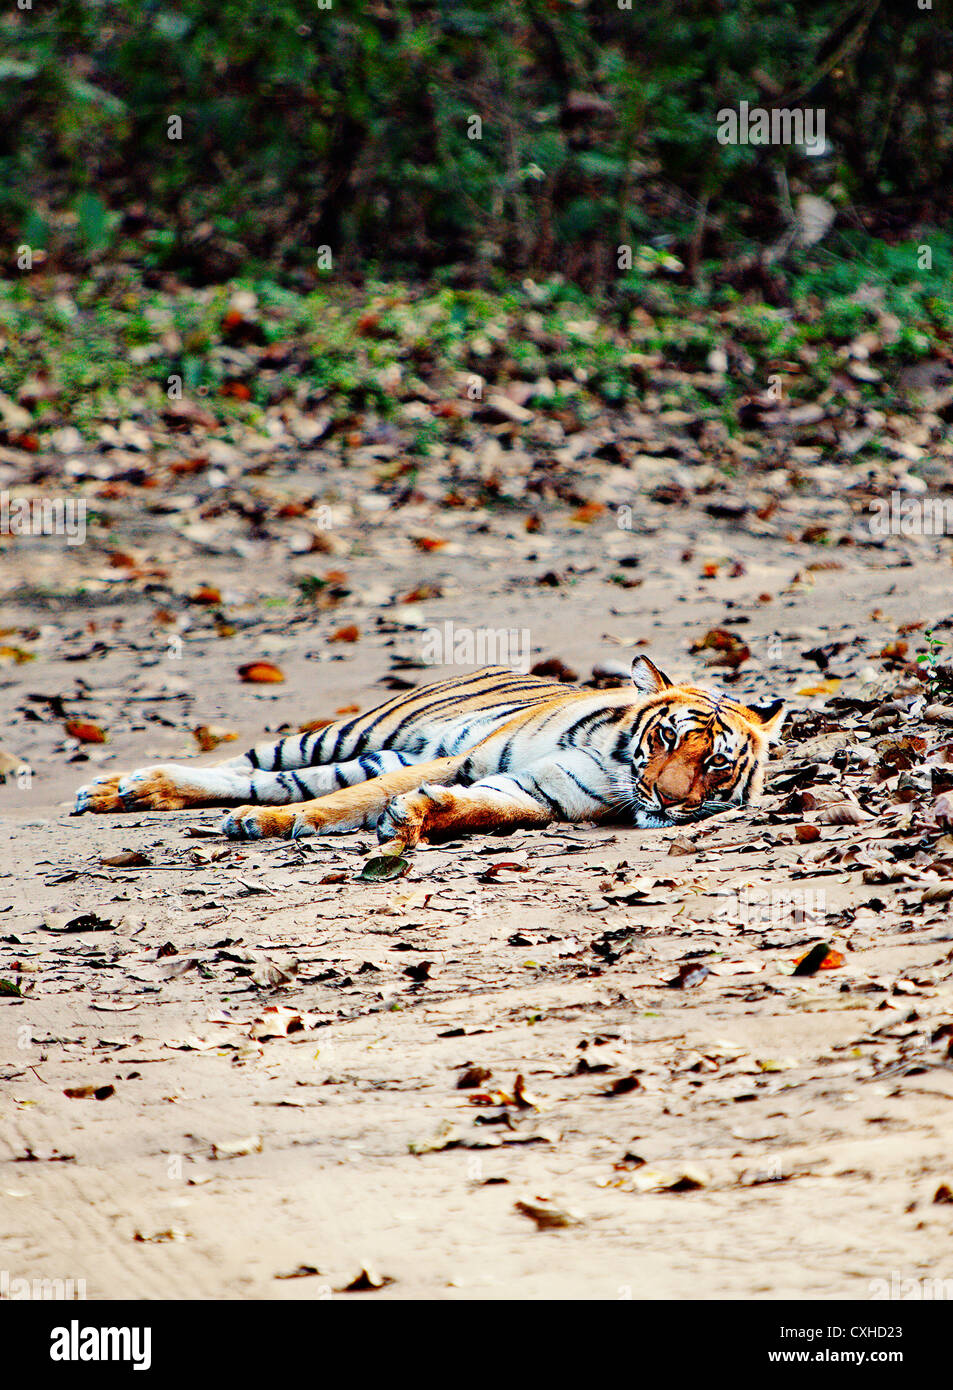 Tiger (3 years old female) on a road in Dhikala area in Jim Corbett Tiger Reserve, India. Stock Photo